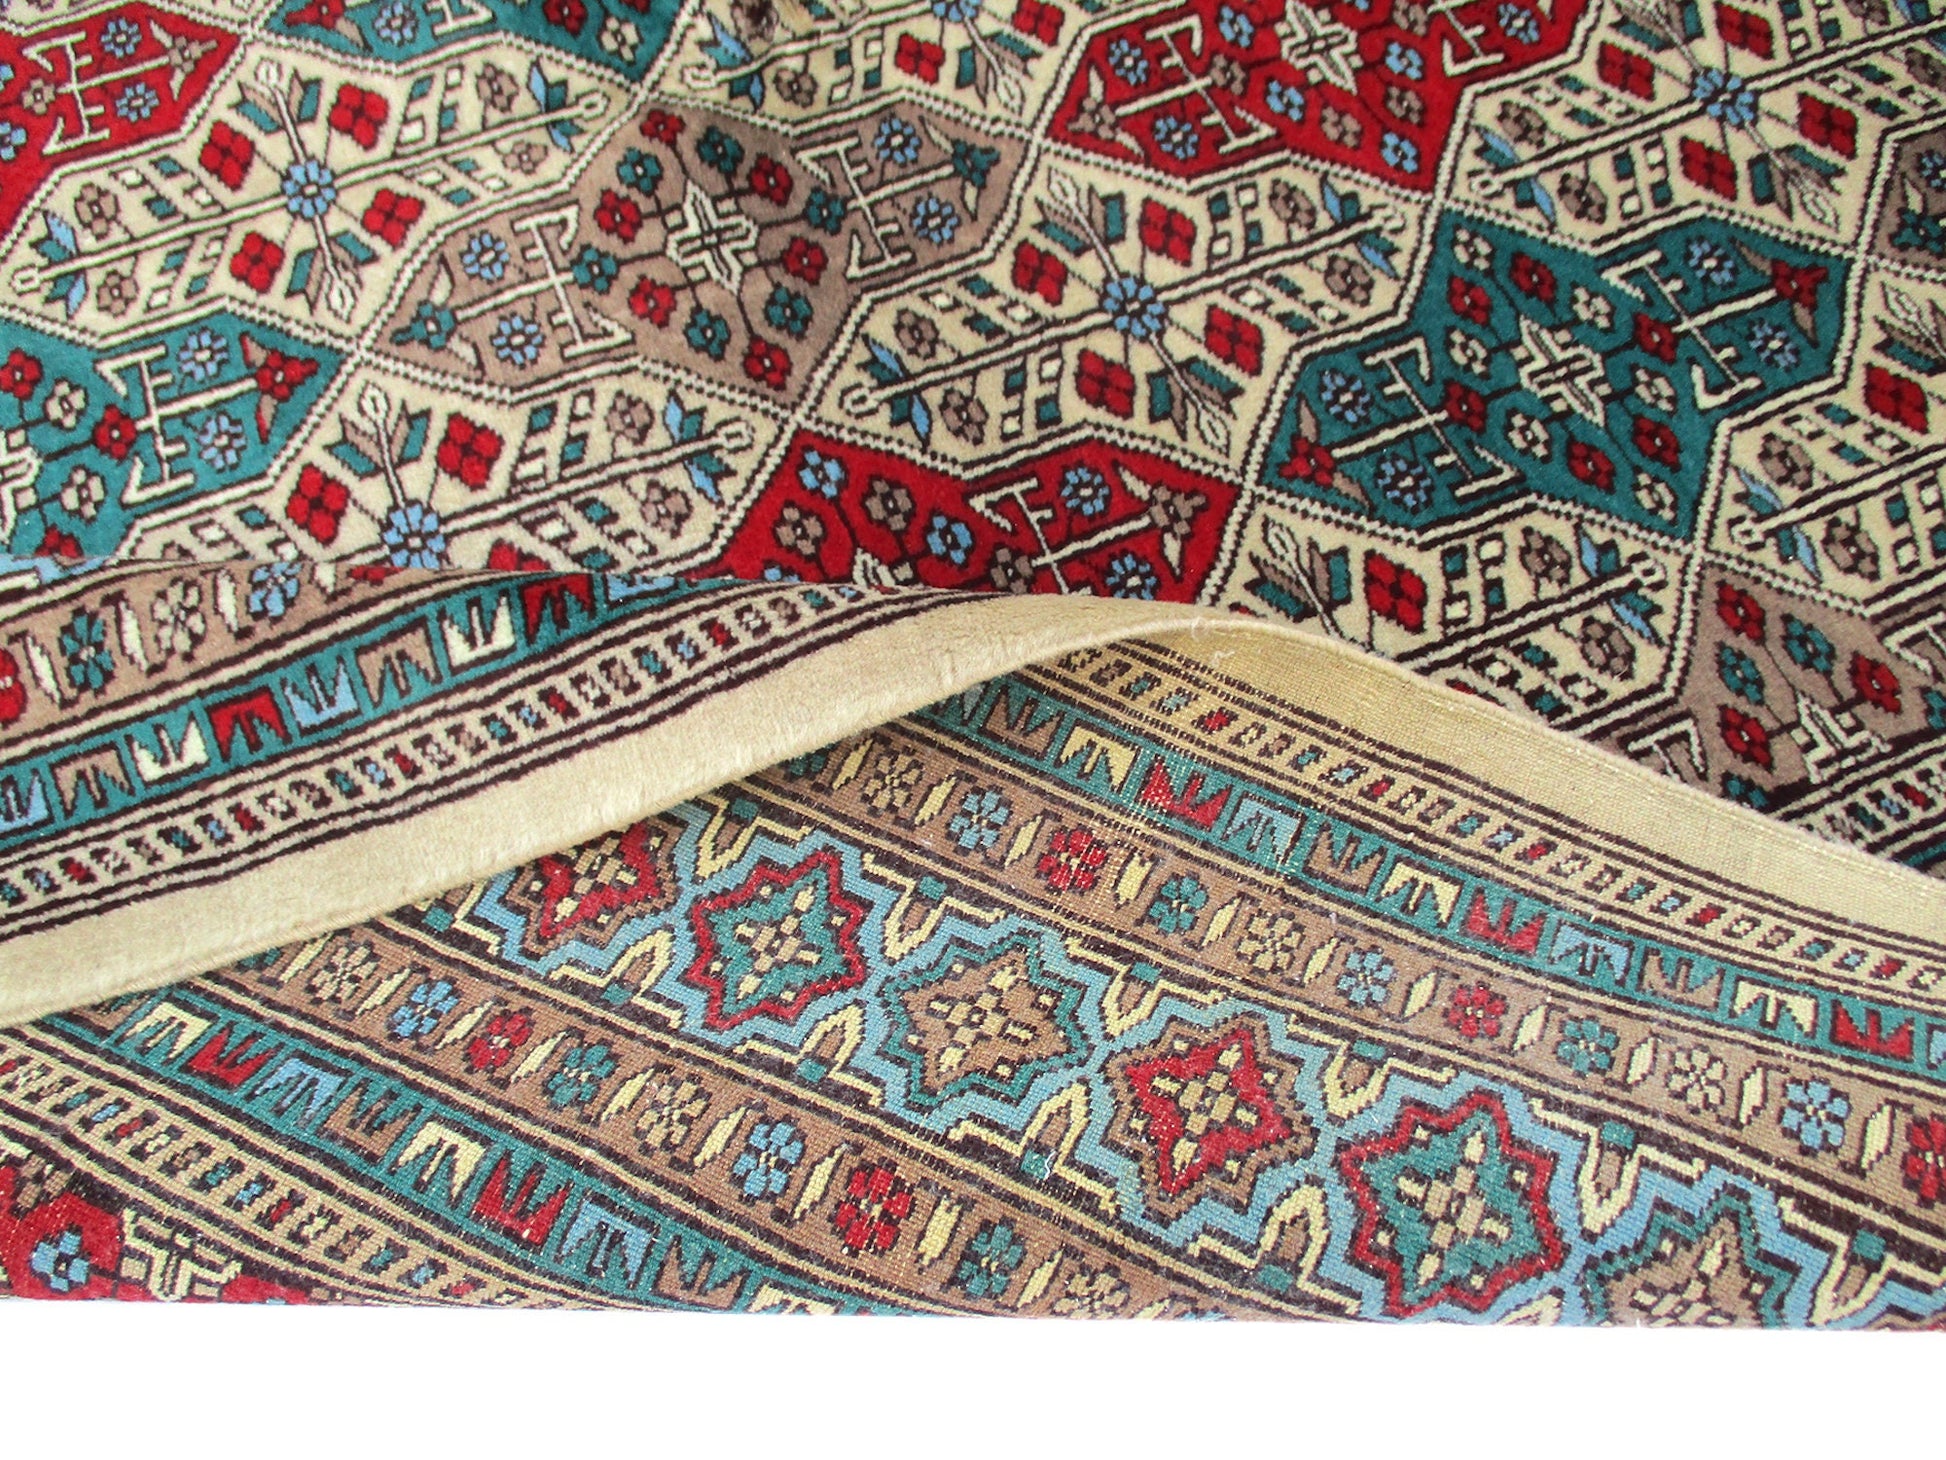 4 x 7 Feet Multi Color Turkish Caucasian Rug | Hand Woven Wool & Silk | Oriental Persian Pattern With Thick Blue Red Green Border Soft Pile